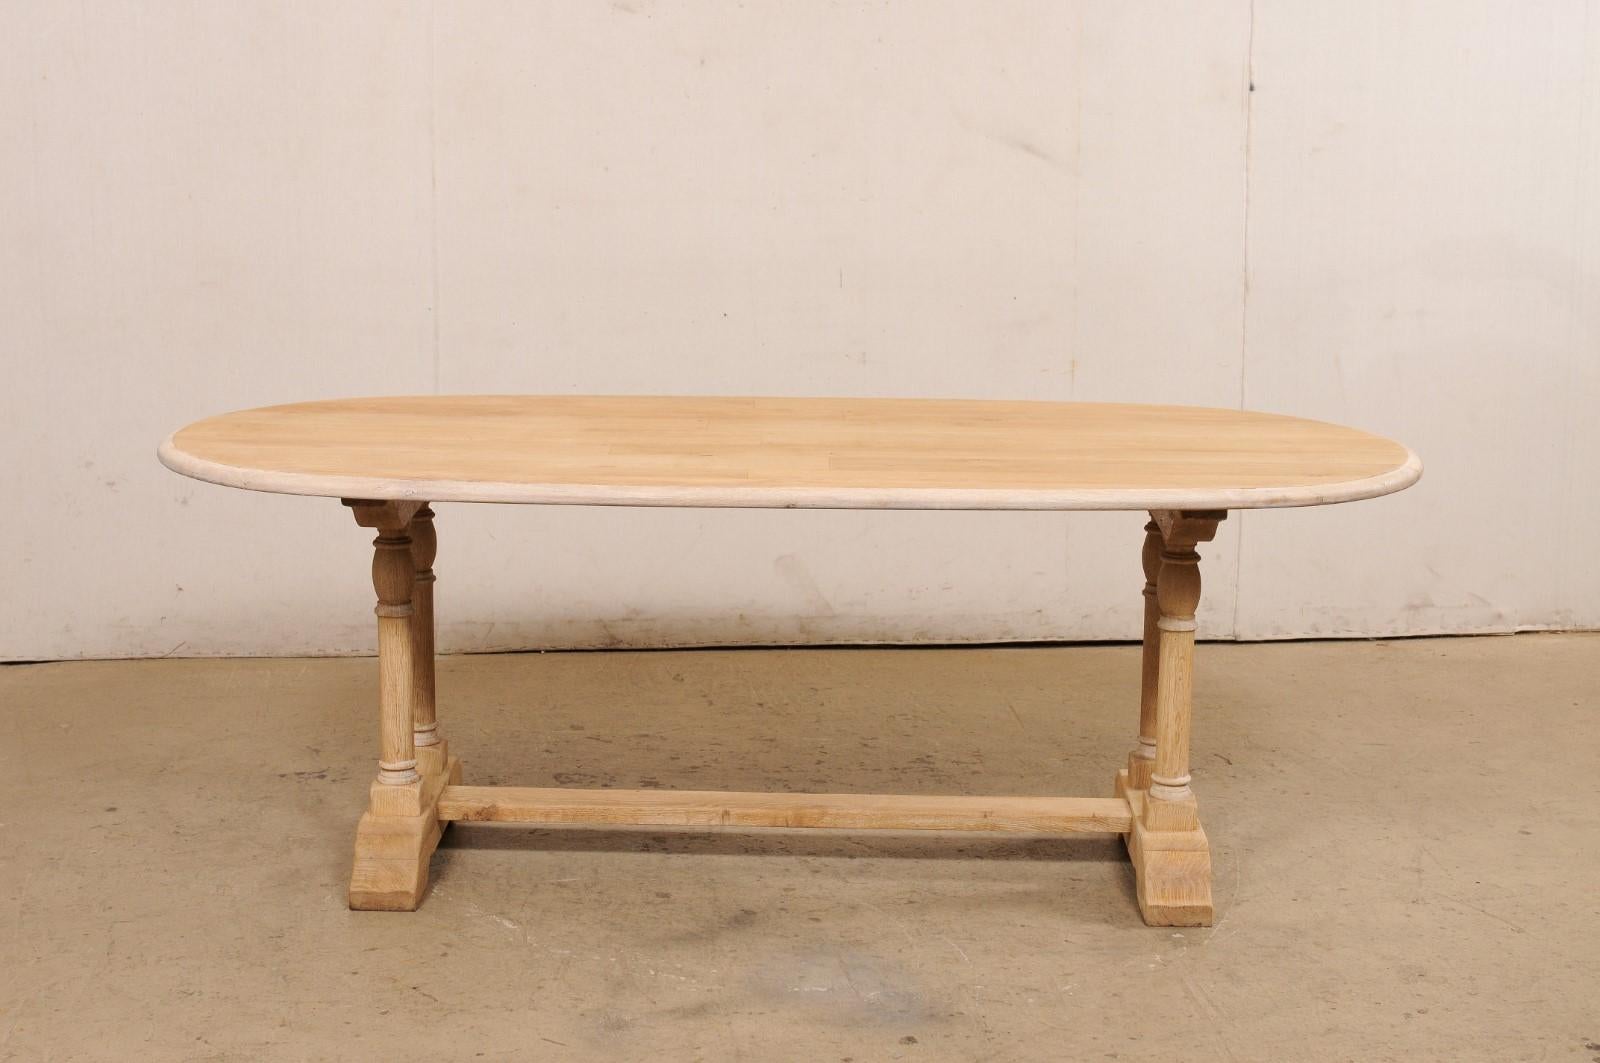 A French Oval-Shaped Bleached Wood Trestle Dining Table, Mid 20th Century For Sale 8